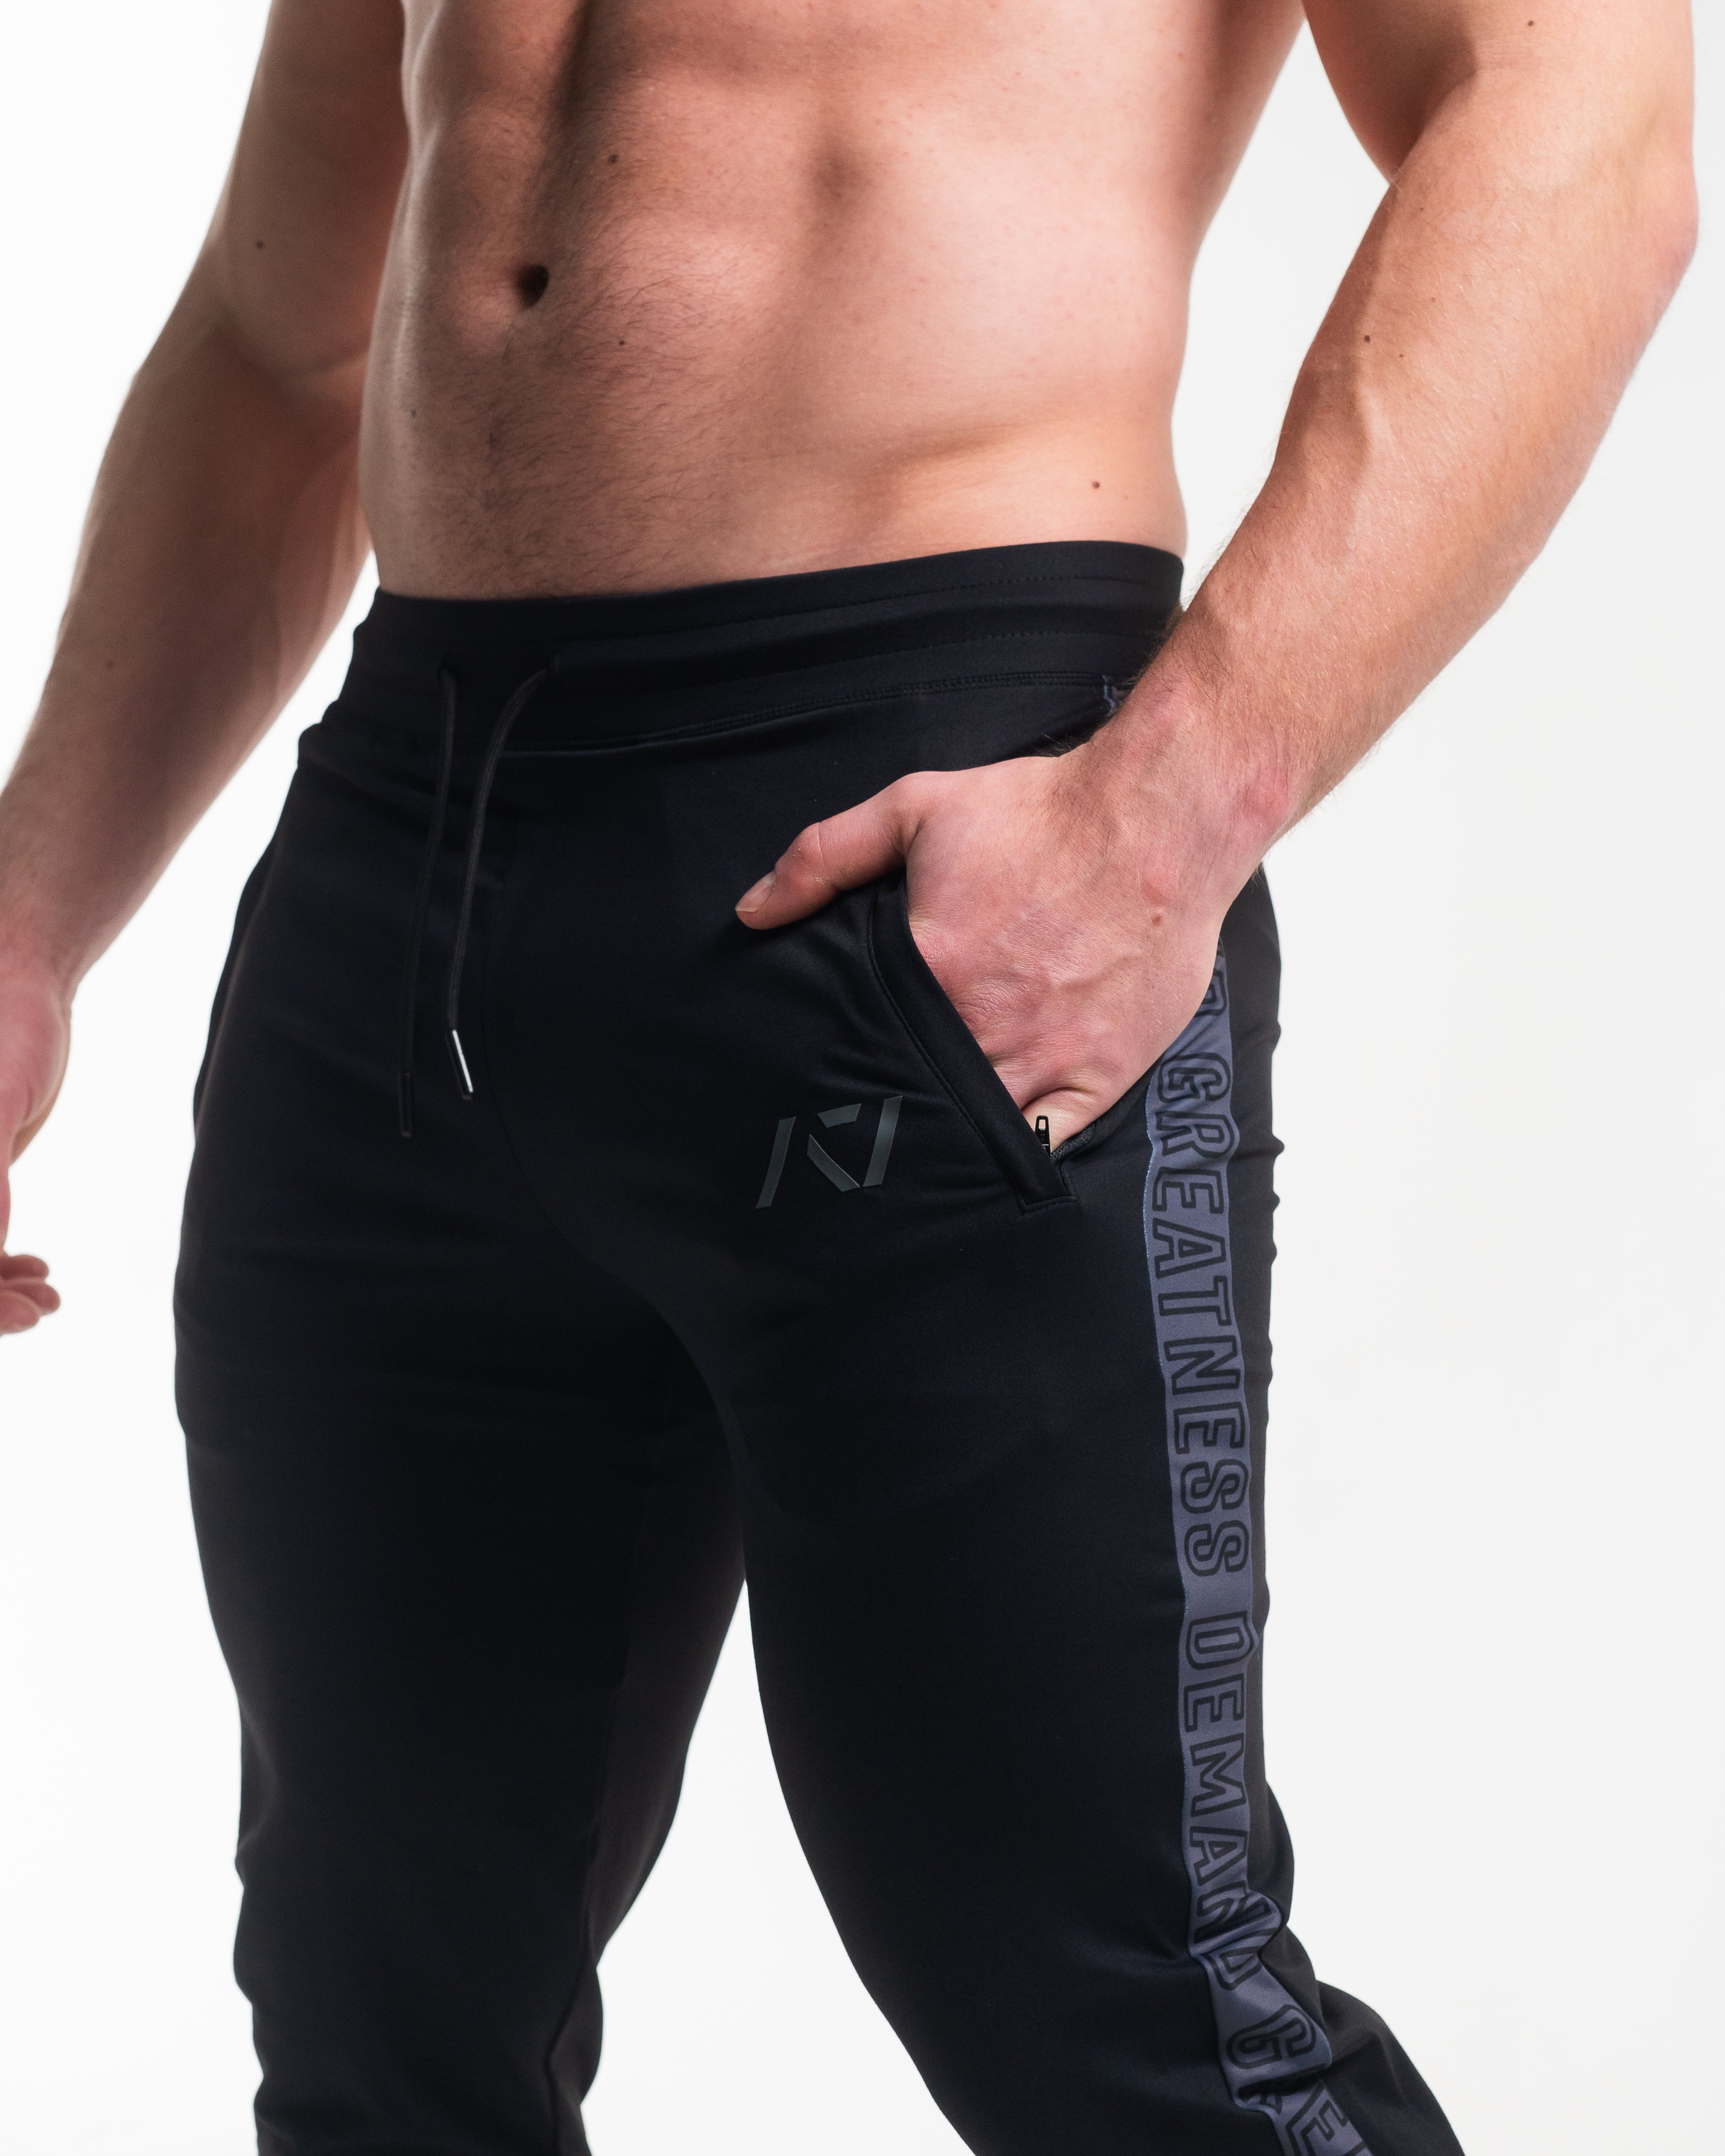 A7 Shadow Stone Defy joggers are just as comfortable in the gym as they are going out. These are made with premium moisture-wicking 4-way-stretch material for greater range of motion. These are a great fit for both men and women. All A7 Powerlifting Equipment shipping to France, Spain, Ireland, Germany, Italy, Sweden and EU. 